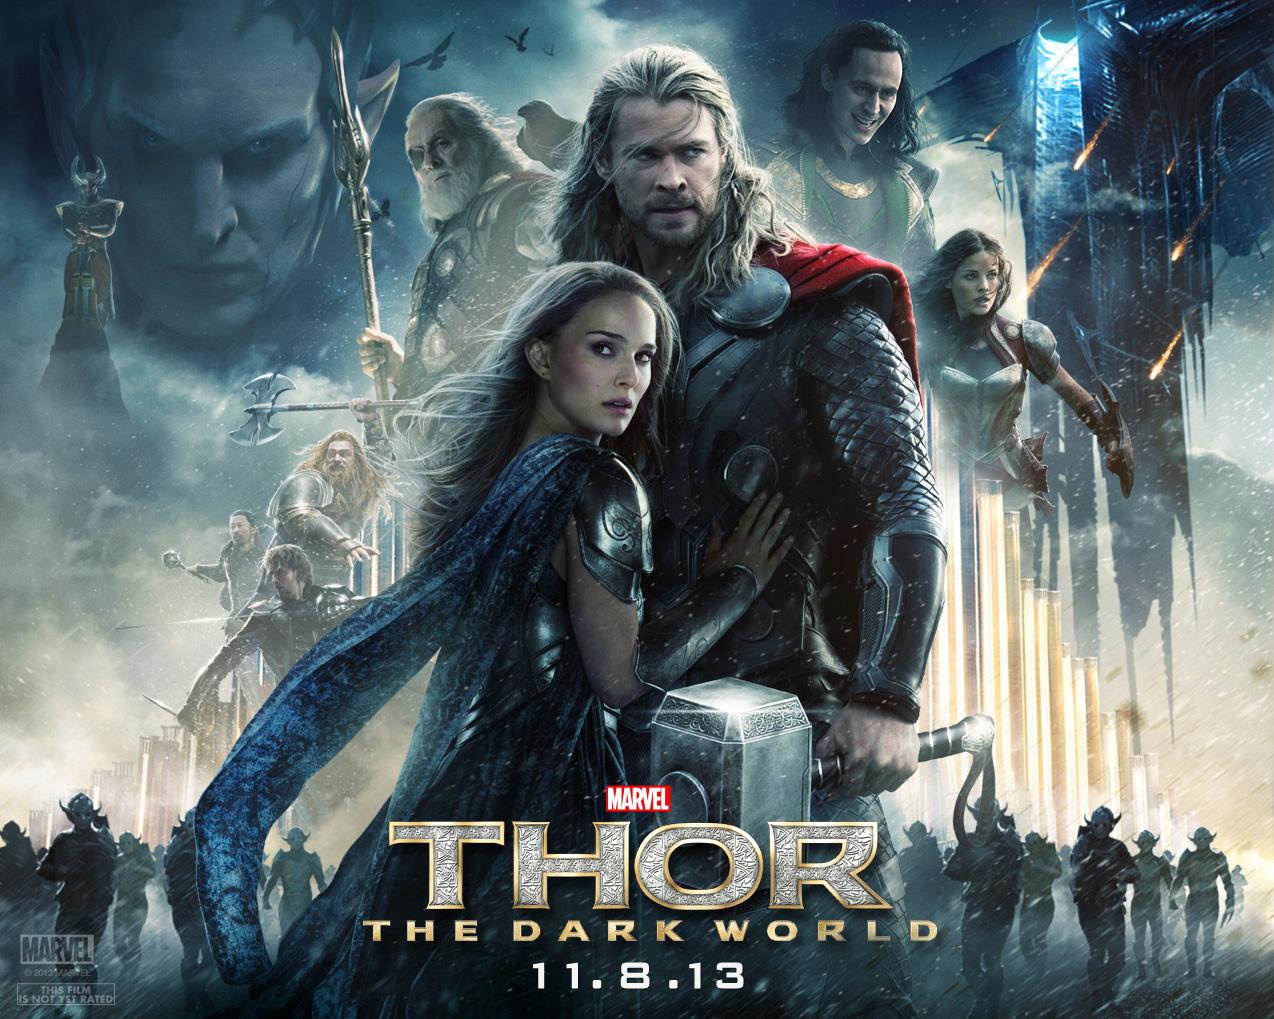 ... of the Marvel Cinematic Universe continues with Thor: The Dark World